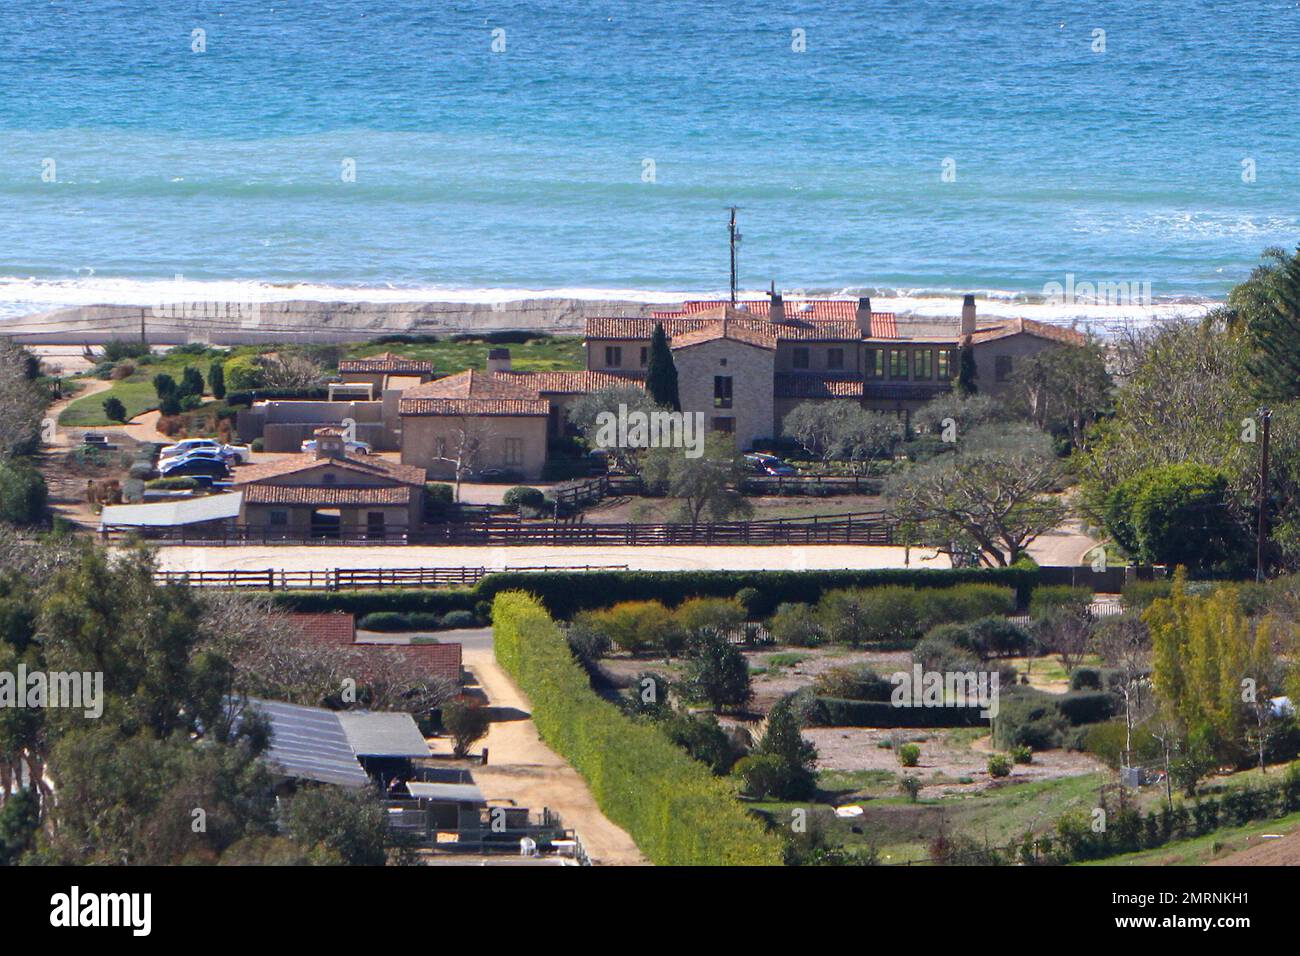 General views of Lady Gaga's Malibu home. The five bedroom, twelve bathroom Mediterranean-style villa is worth $23 million and boasts a saltwater swimming pool with spa, a luxury stable and dressage ring, and a two lane Brunswick bowling alley. The 10,270 square feet home also contains a safe room above the main floor. Stock Photo